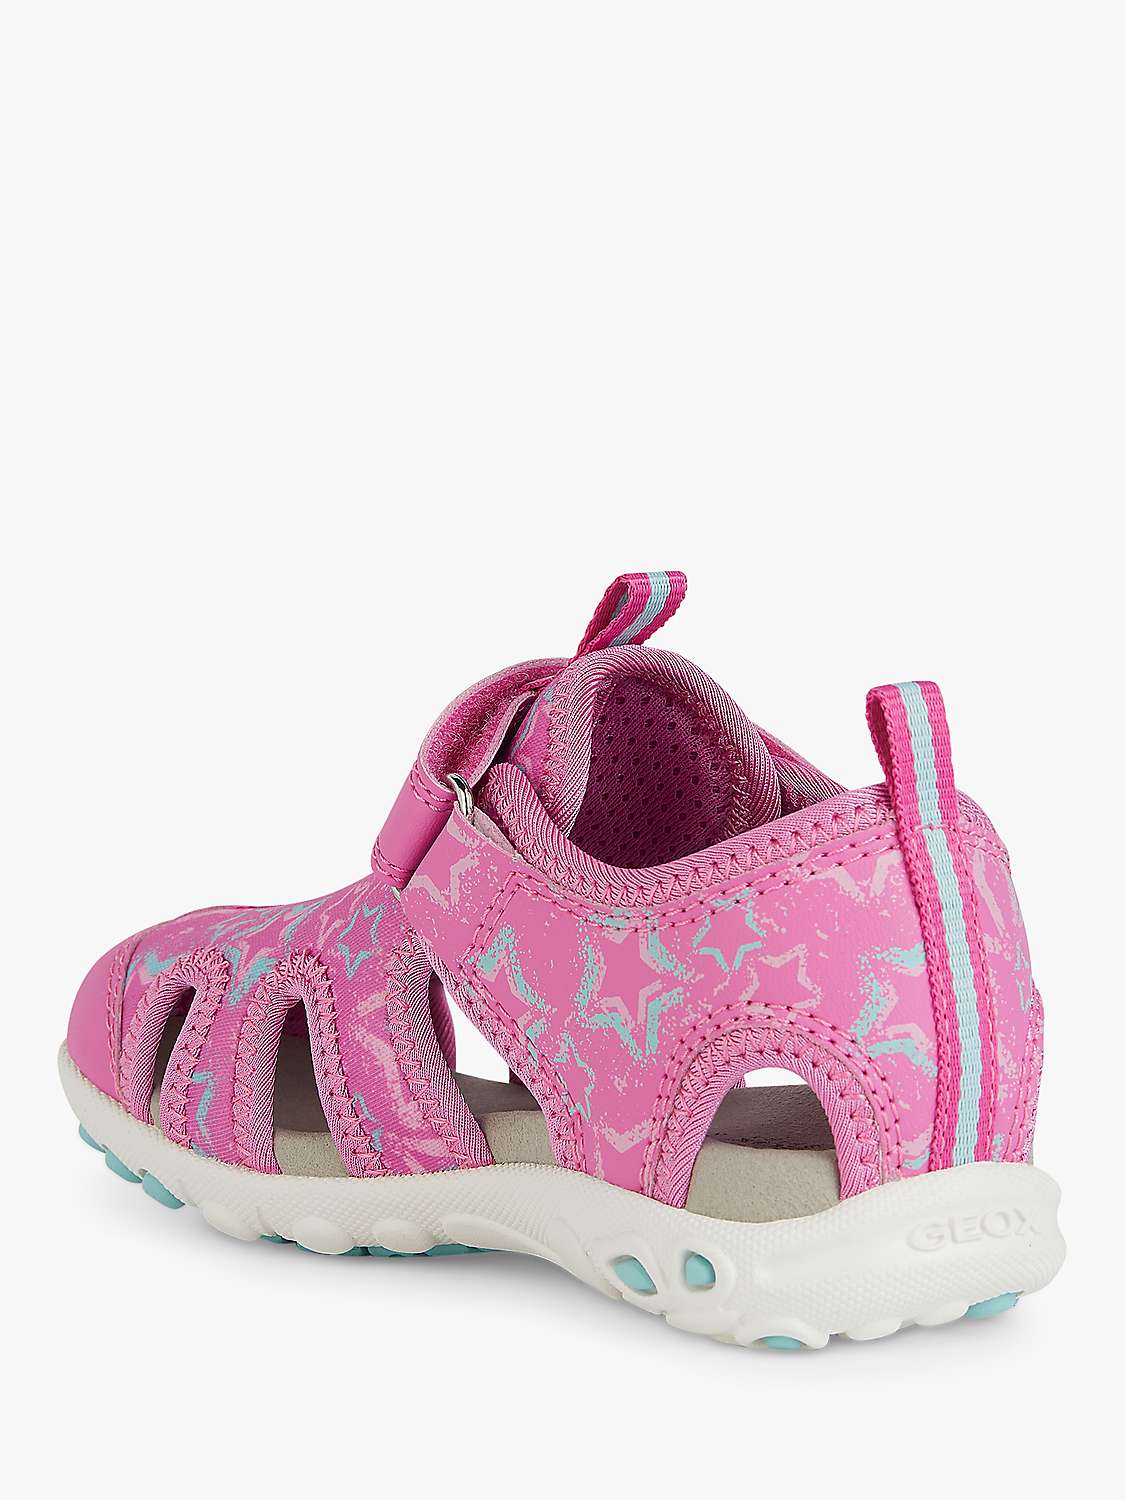 Buy Geox Kids' Whinberry Star Print Closed Toe Sandals Online at johnlewis.com